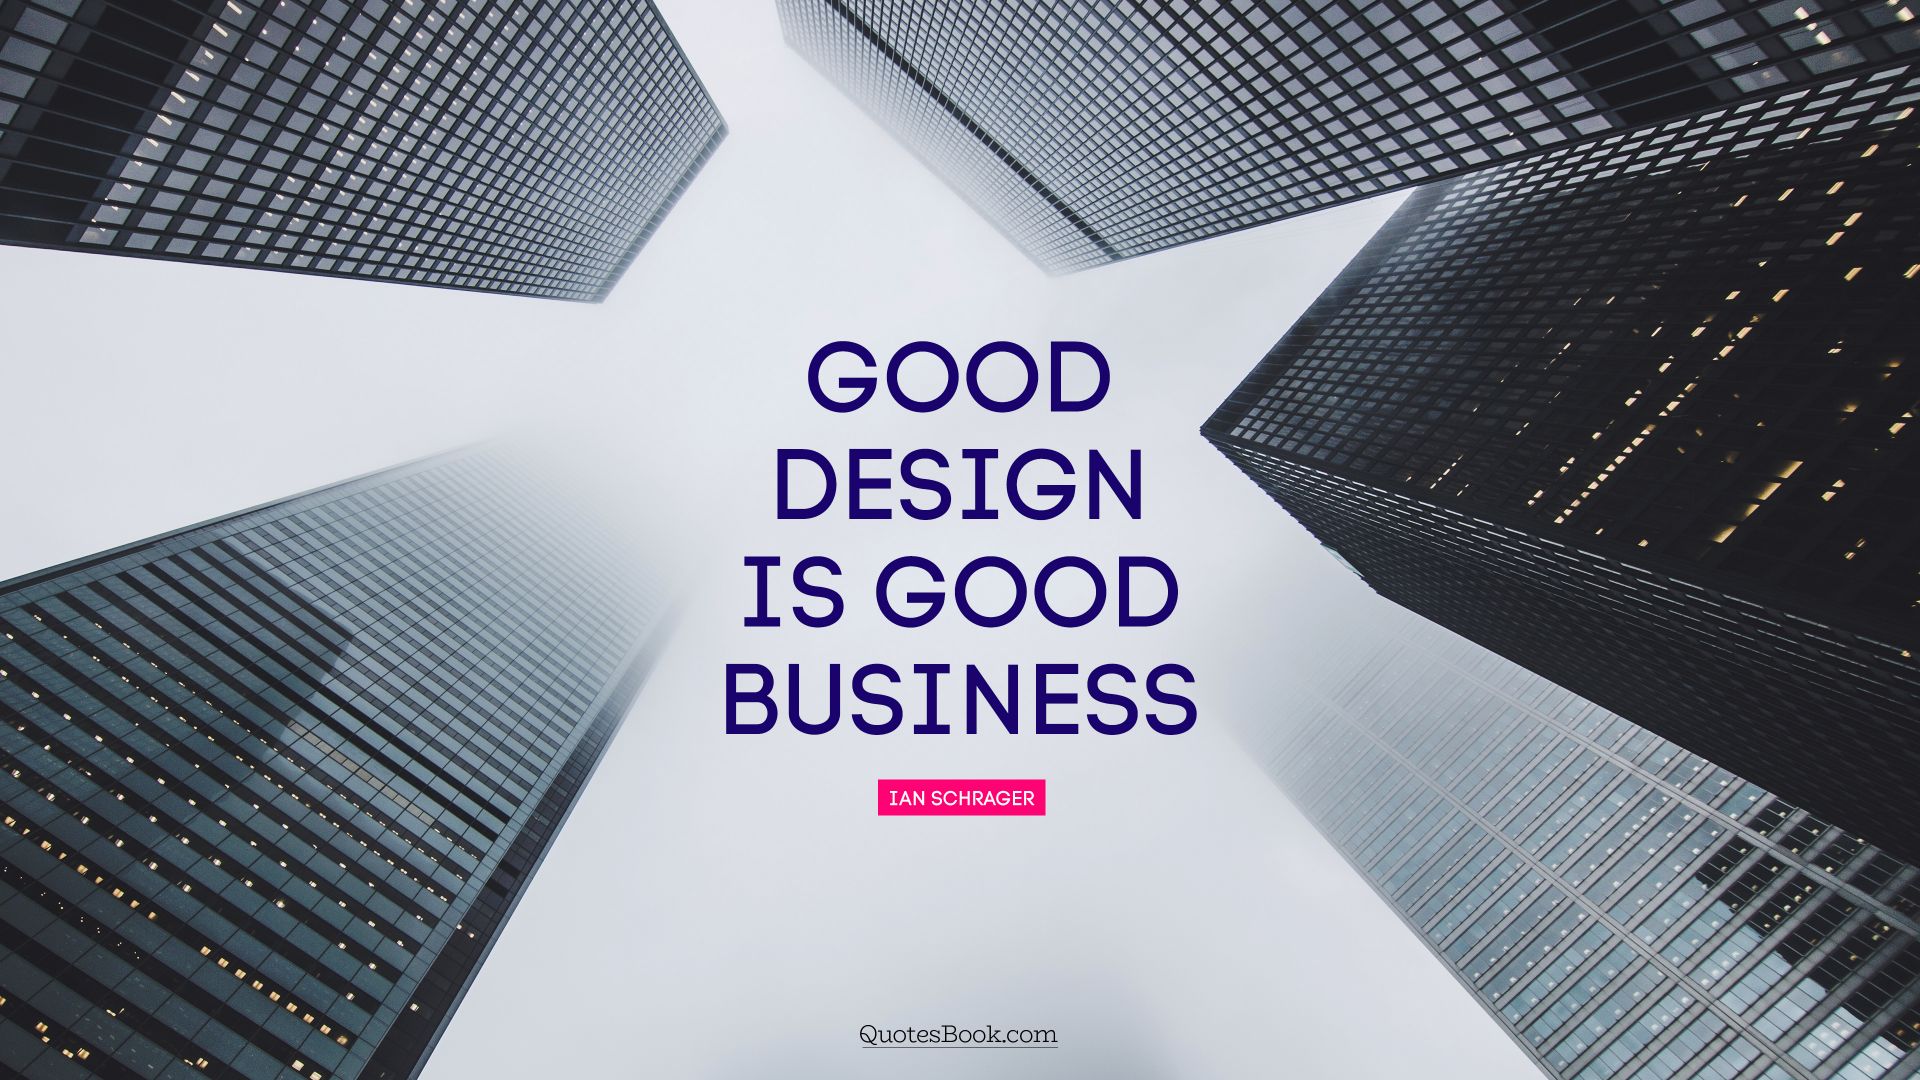 Good design is good business. - Quote by Ian Schrager